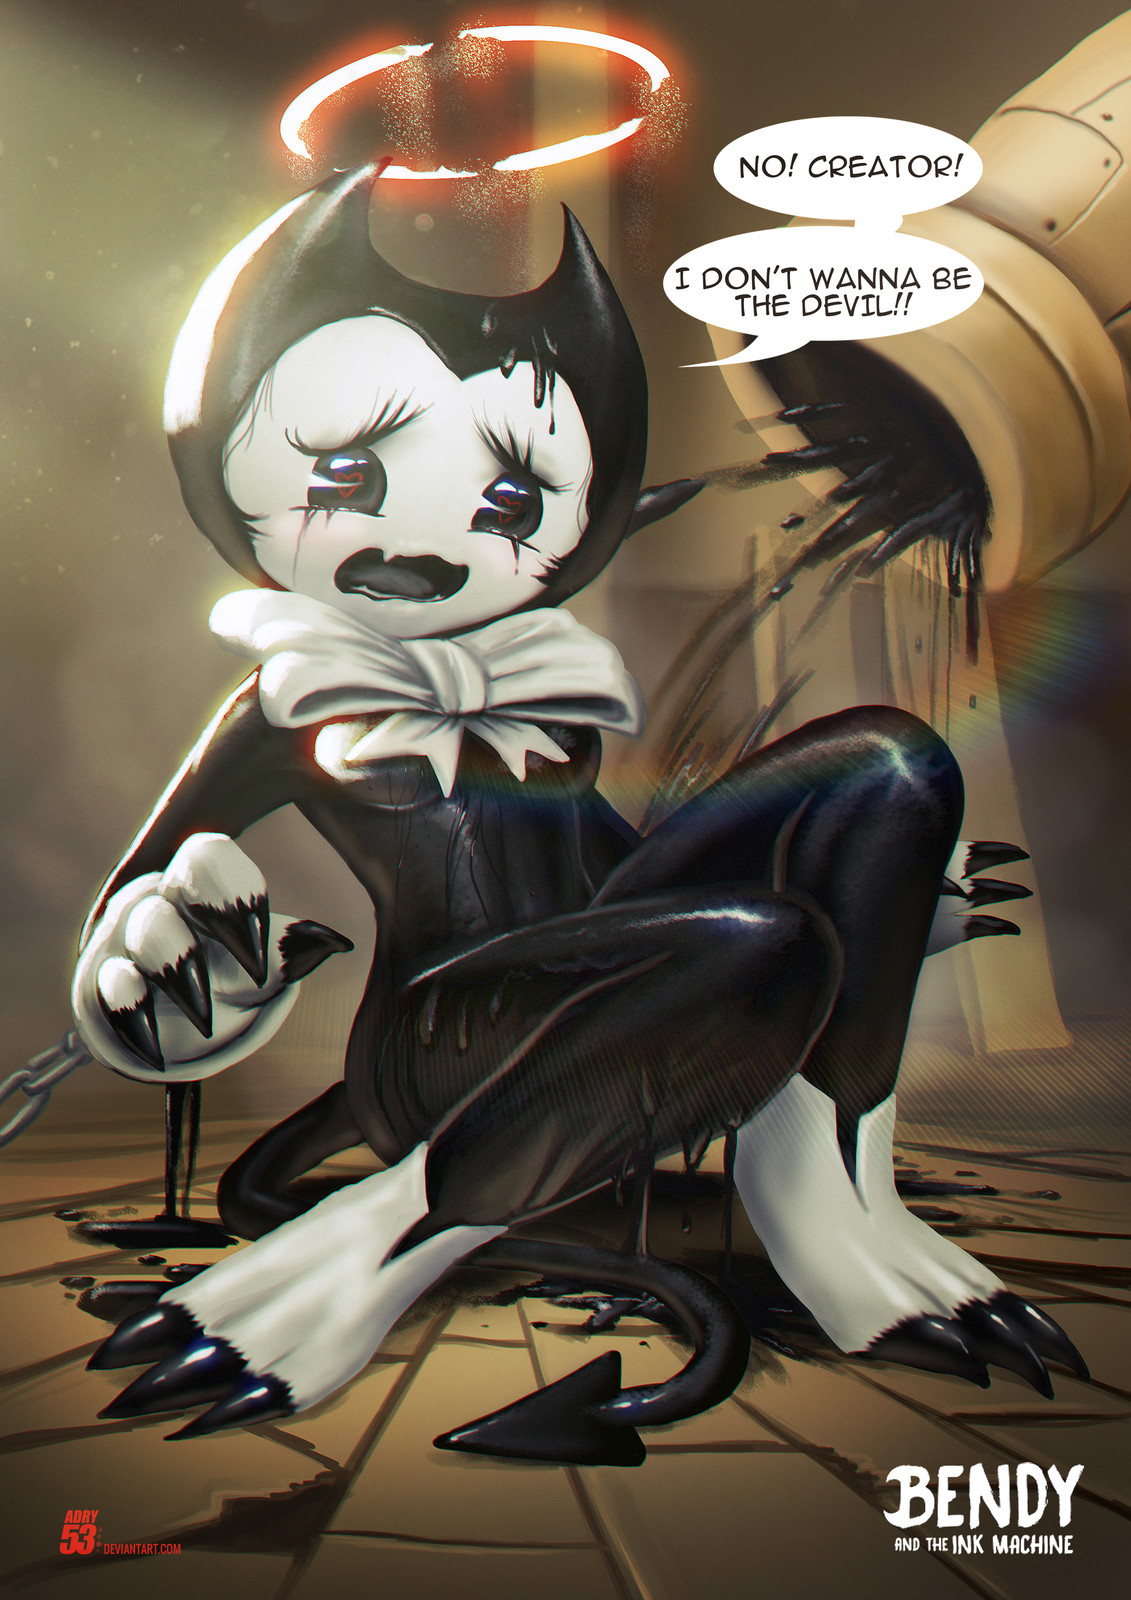 Bendy and The Ink Machine.